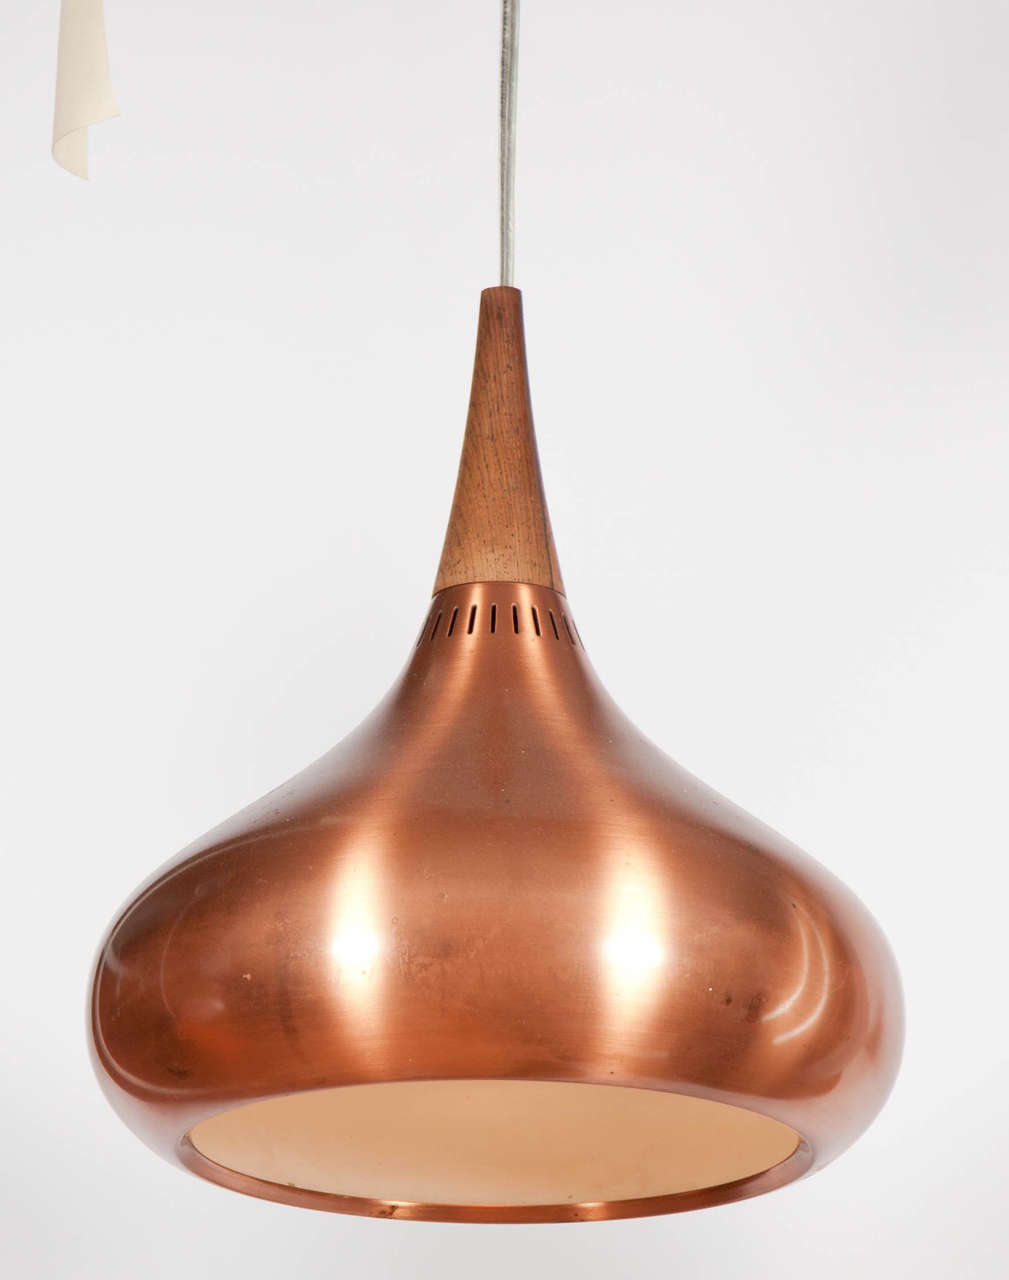 Vintage 1960s copper orange pendant by Jo Hammerborg.

This Fog & Morup hanging light is in excellent condition. The copper looks great but could use a polish if you prefer. Some people like a little patina. The copper is painted white on the